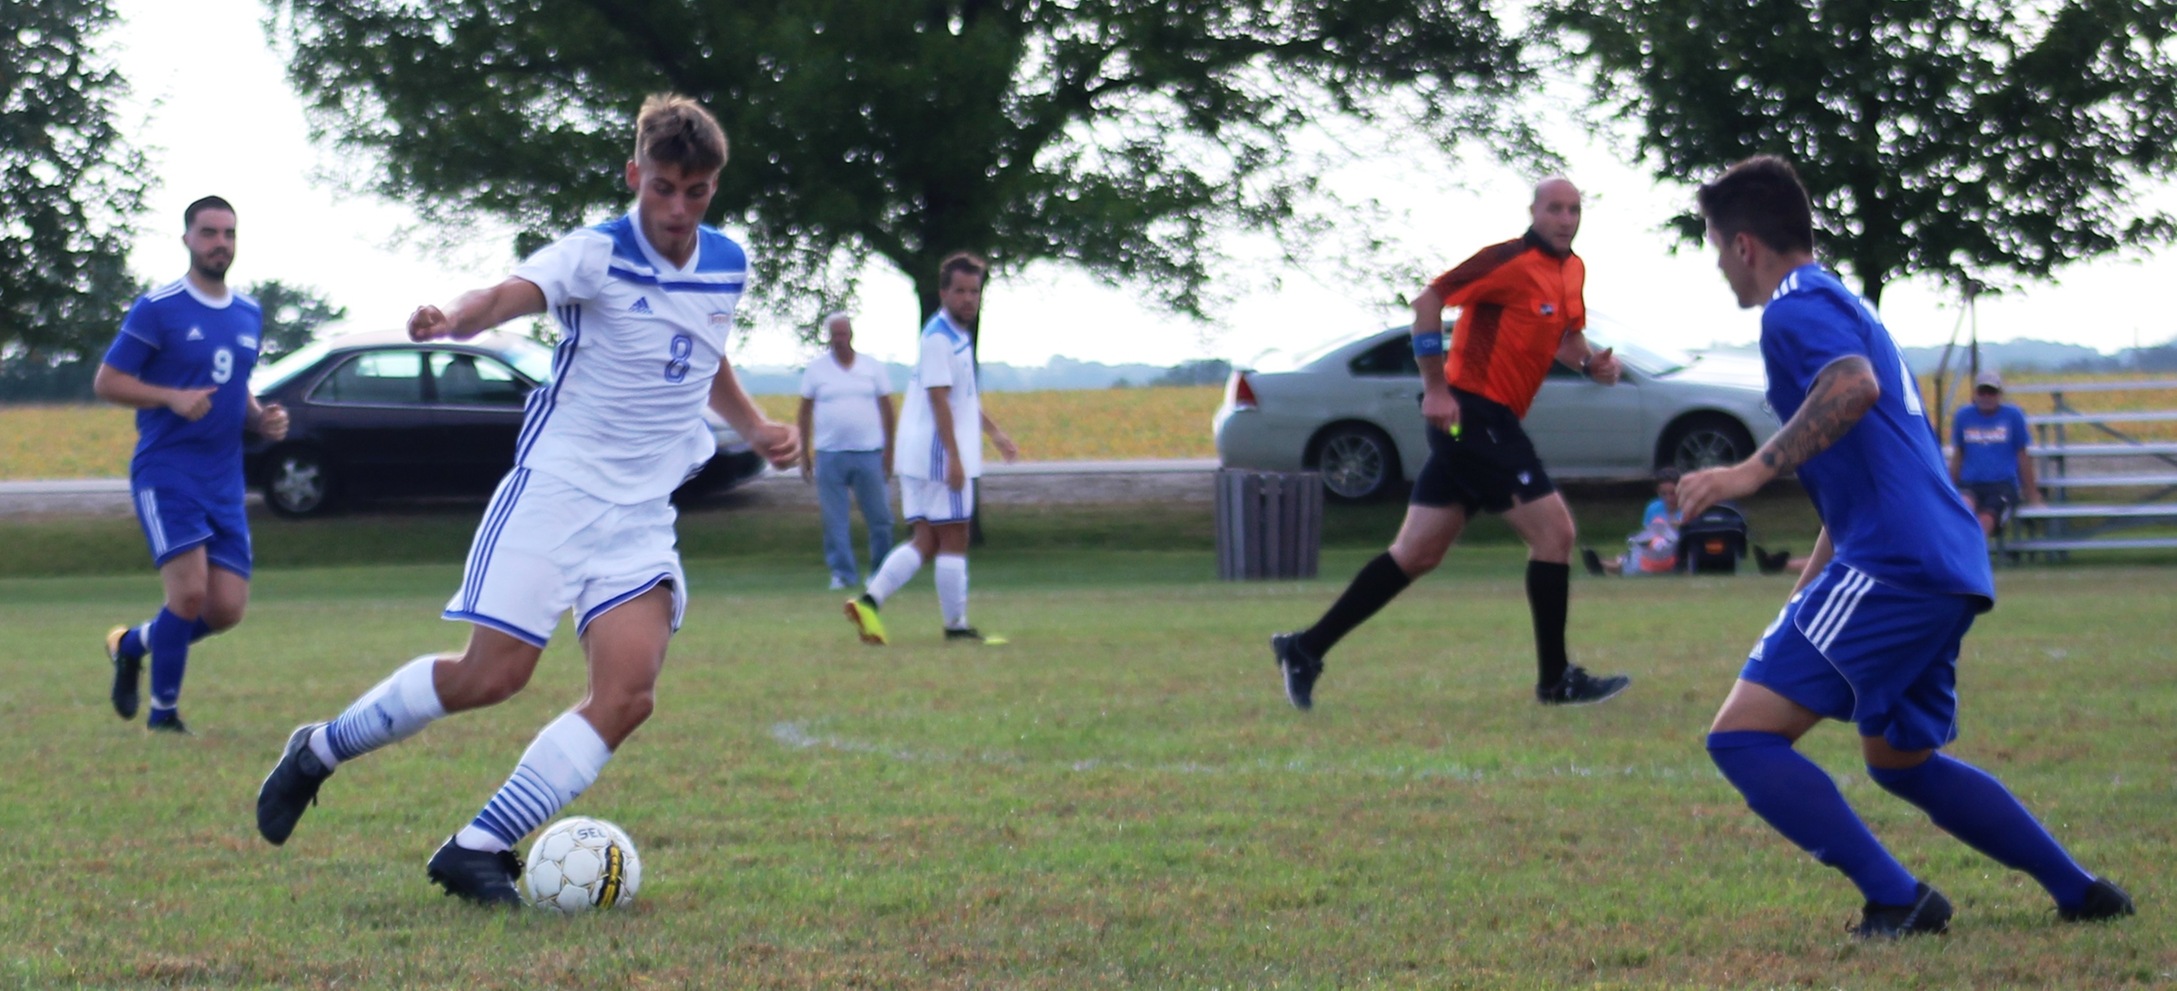 NIACC's Lewis Saunders was selected as the ICCAC men's soccer player of the week for the week of Oct. 8-14.